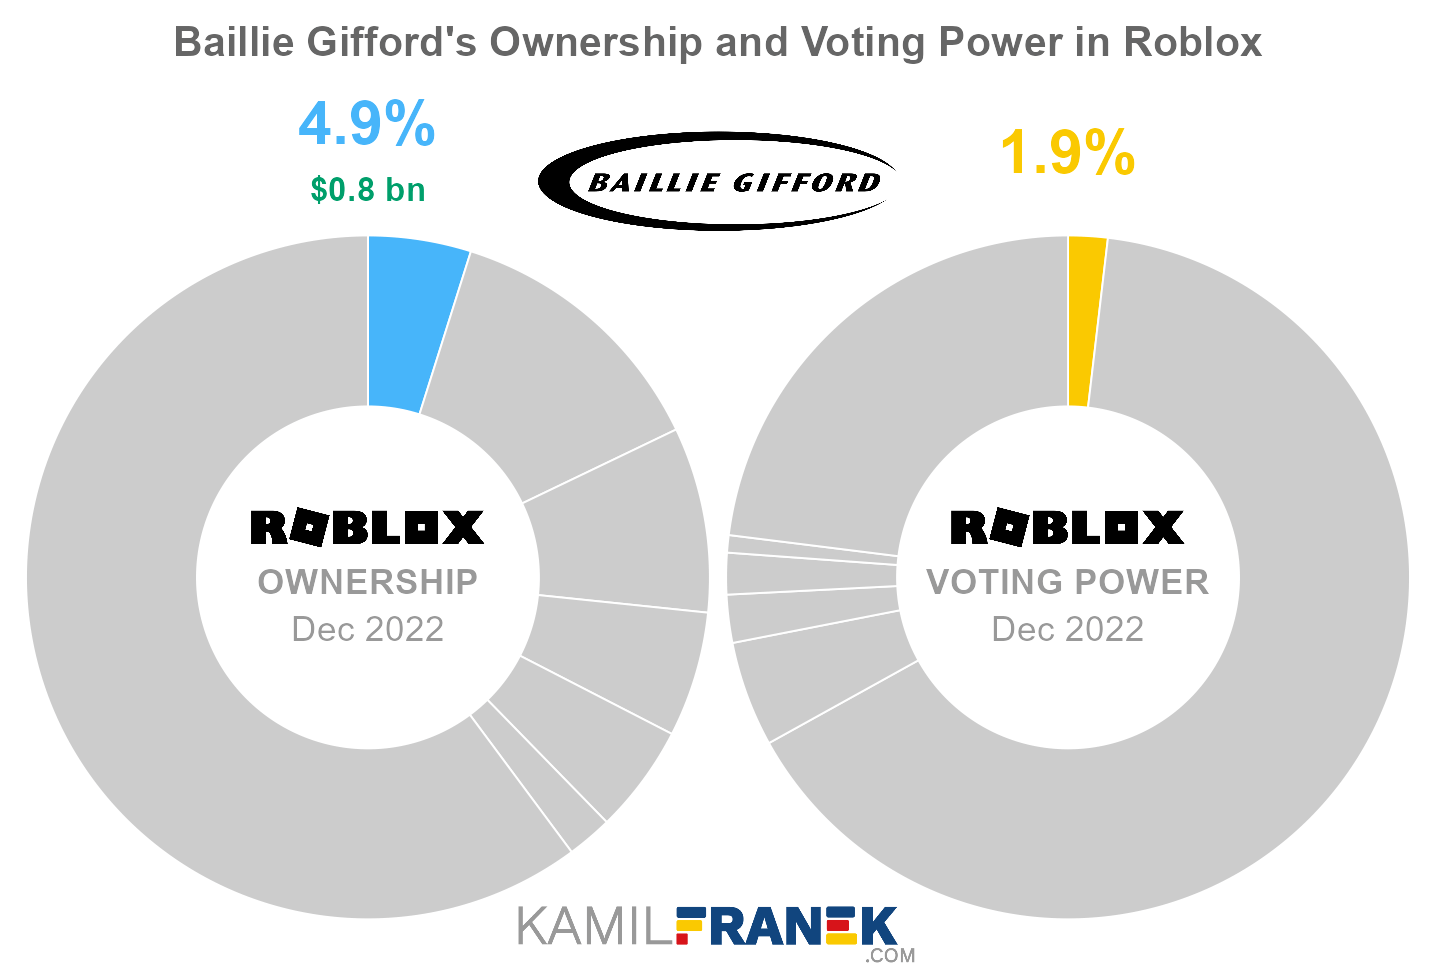 Baillie Gifford's share ownership and voting power in Roblox (chart)